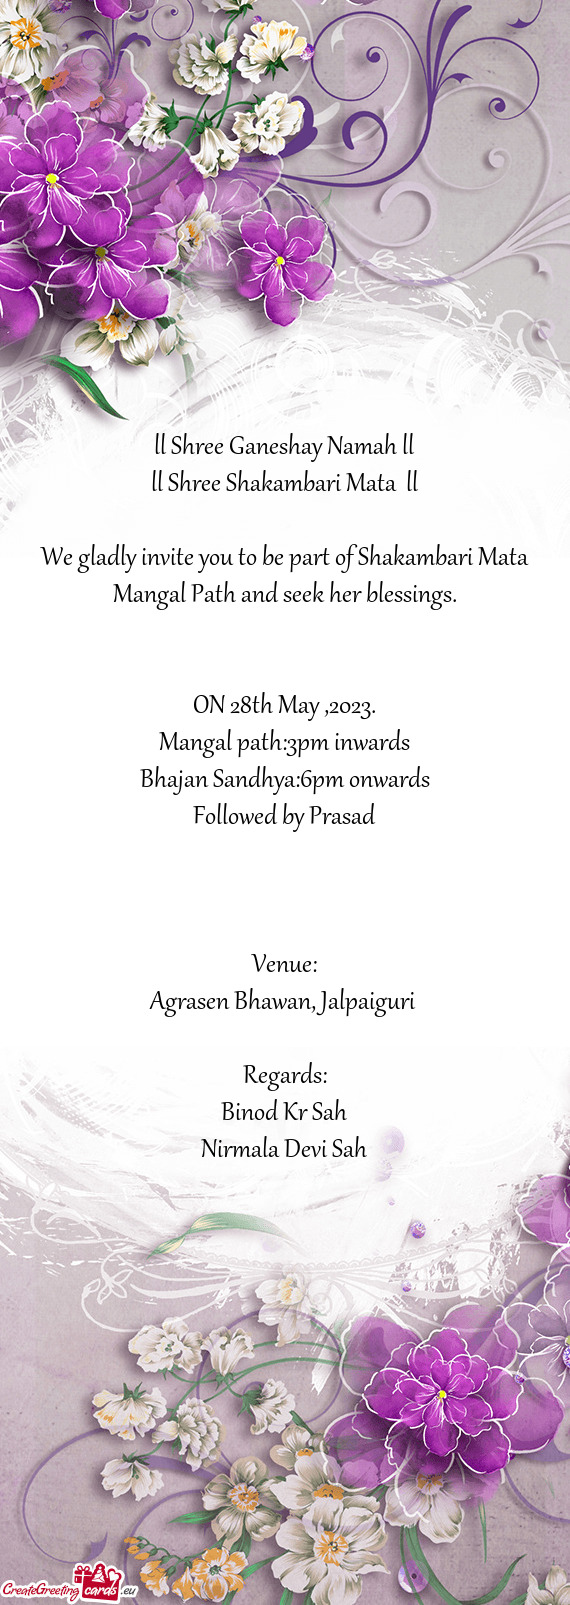 We gladly invite you to be part of Shakambari Mata Mangal Path and seek her blessings